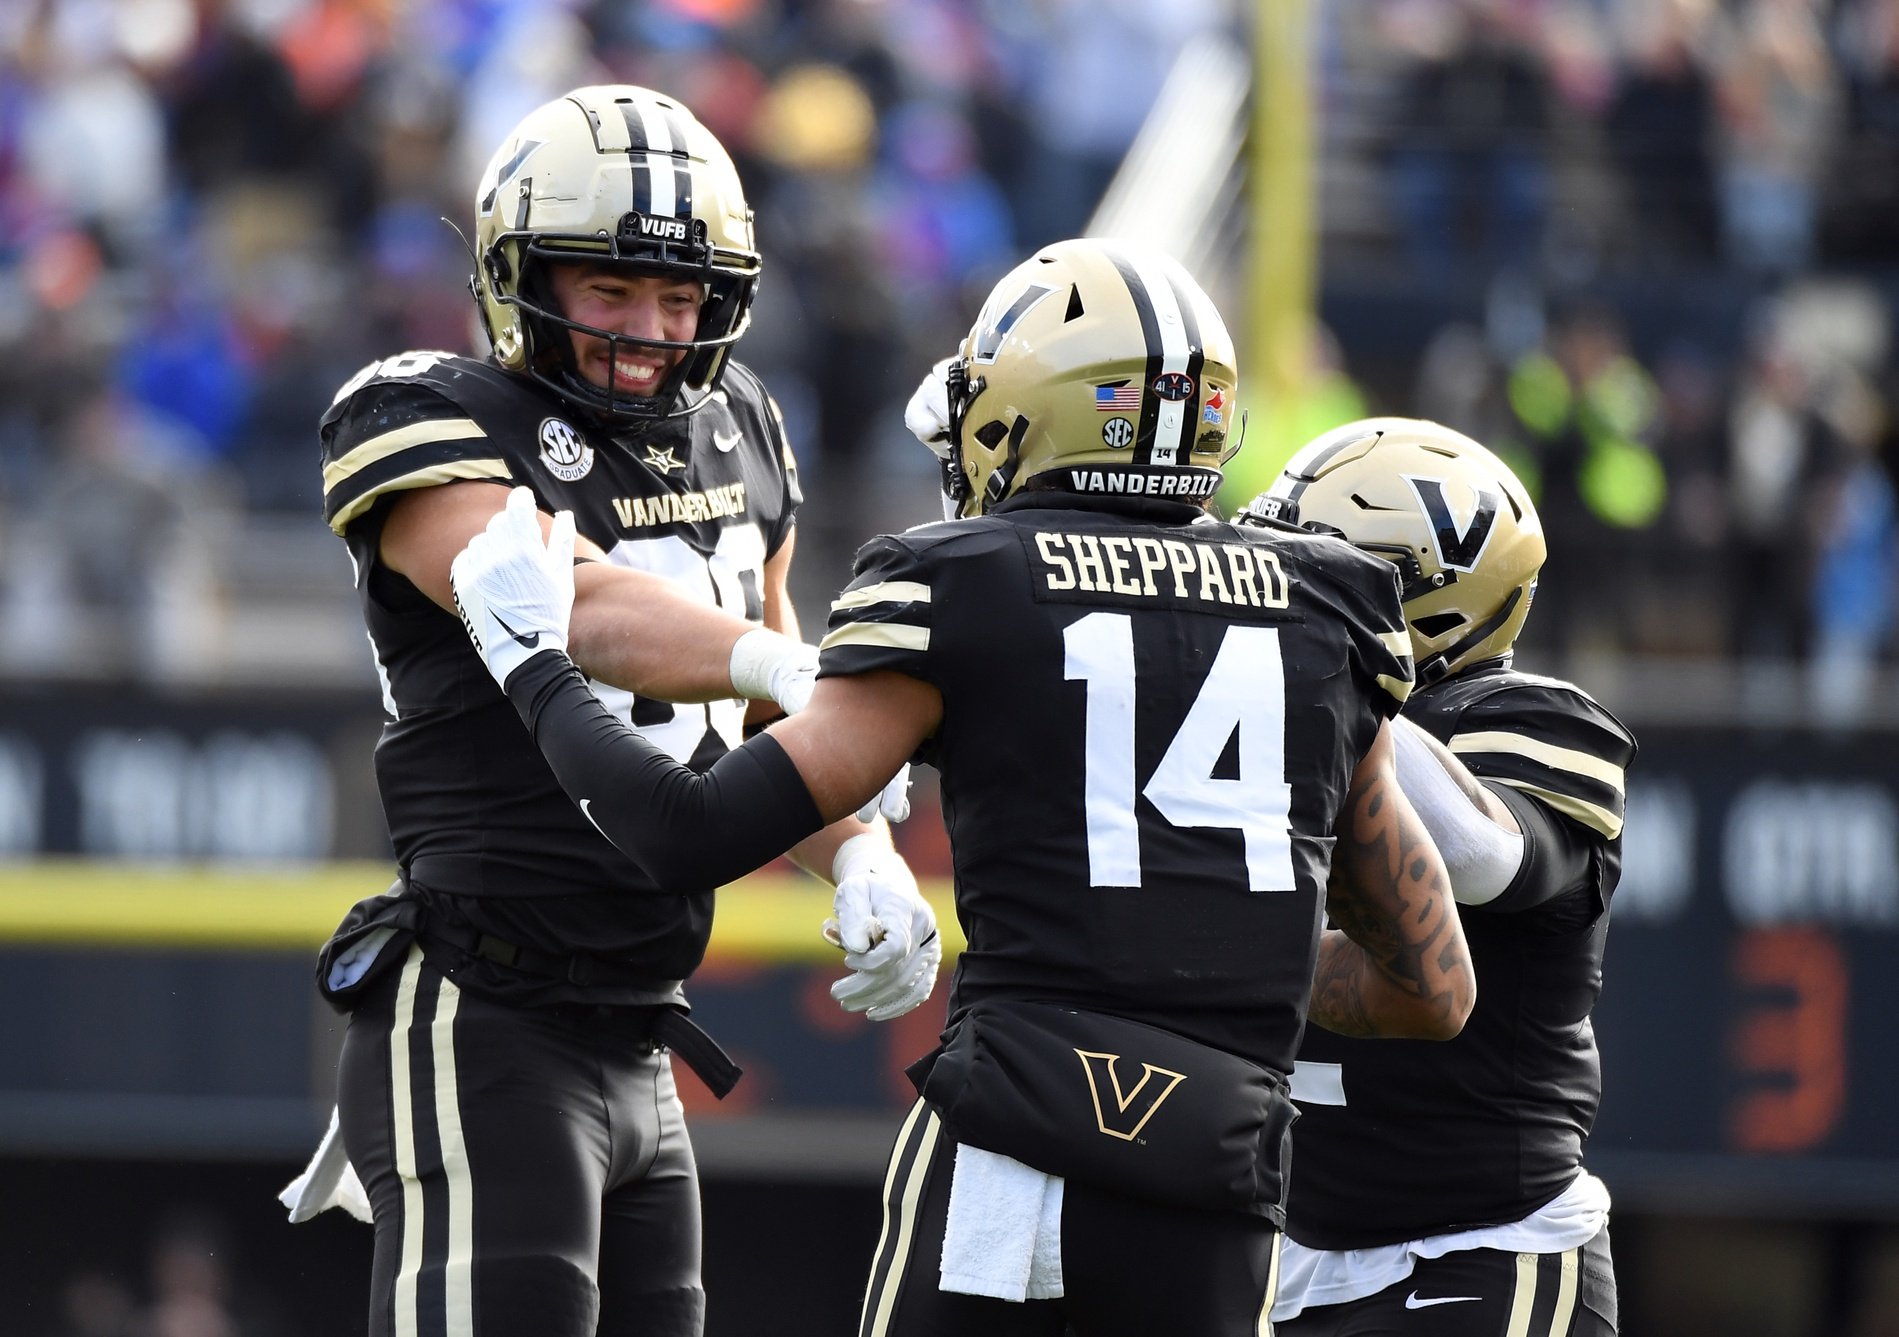 Vanderbilt Commodores Preview: Roster, Prospects, Schedule, and More